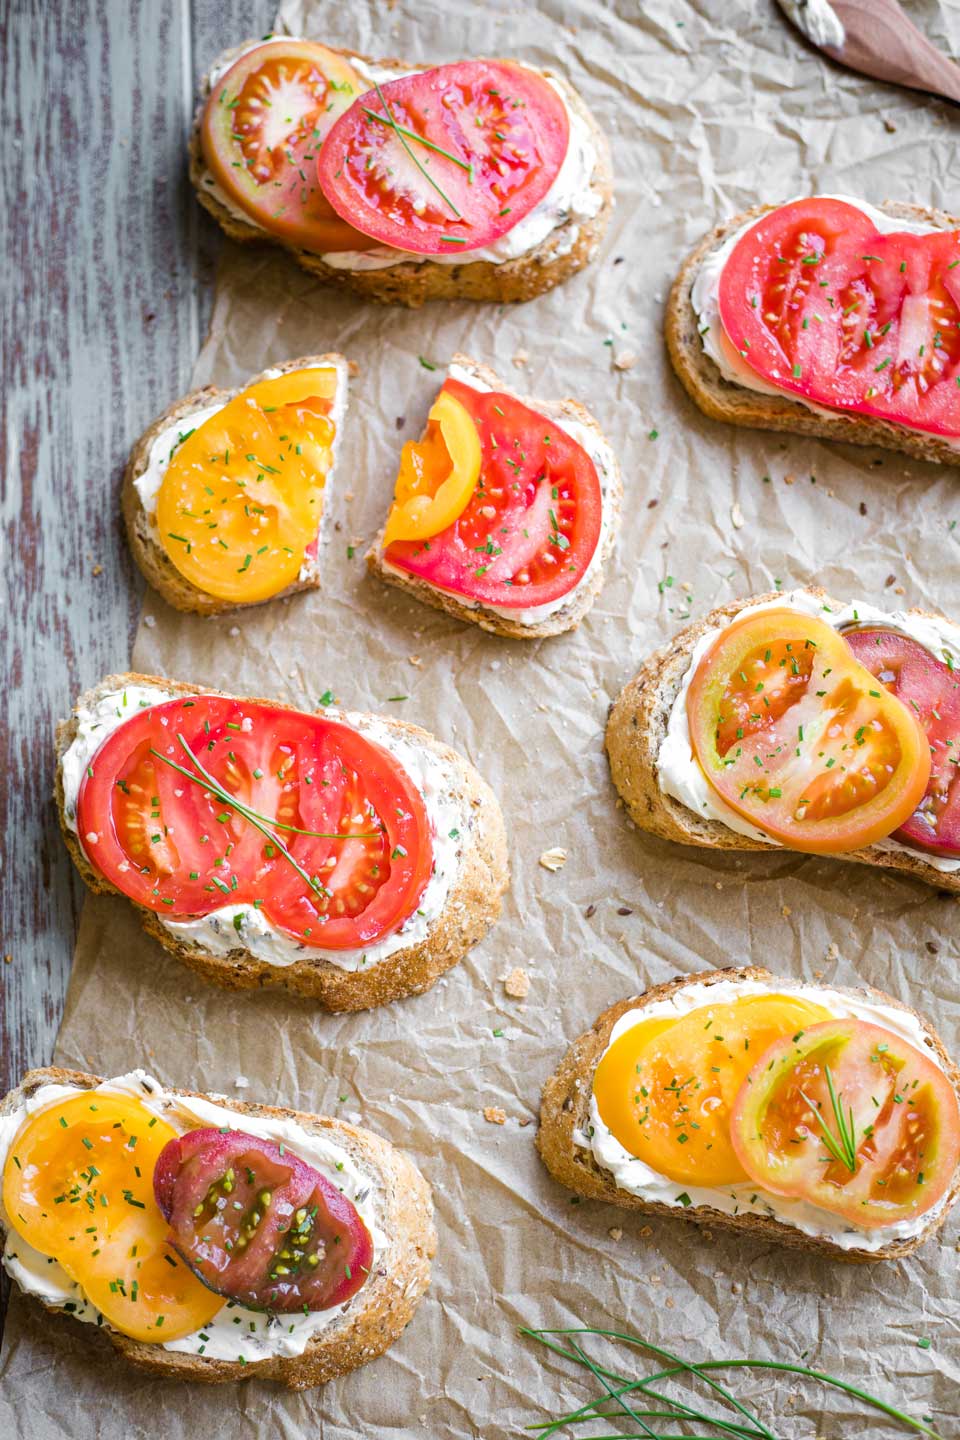 7 open-faced sandwiches, showing different varieties of tomato